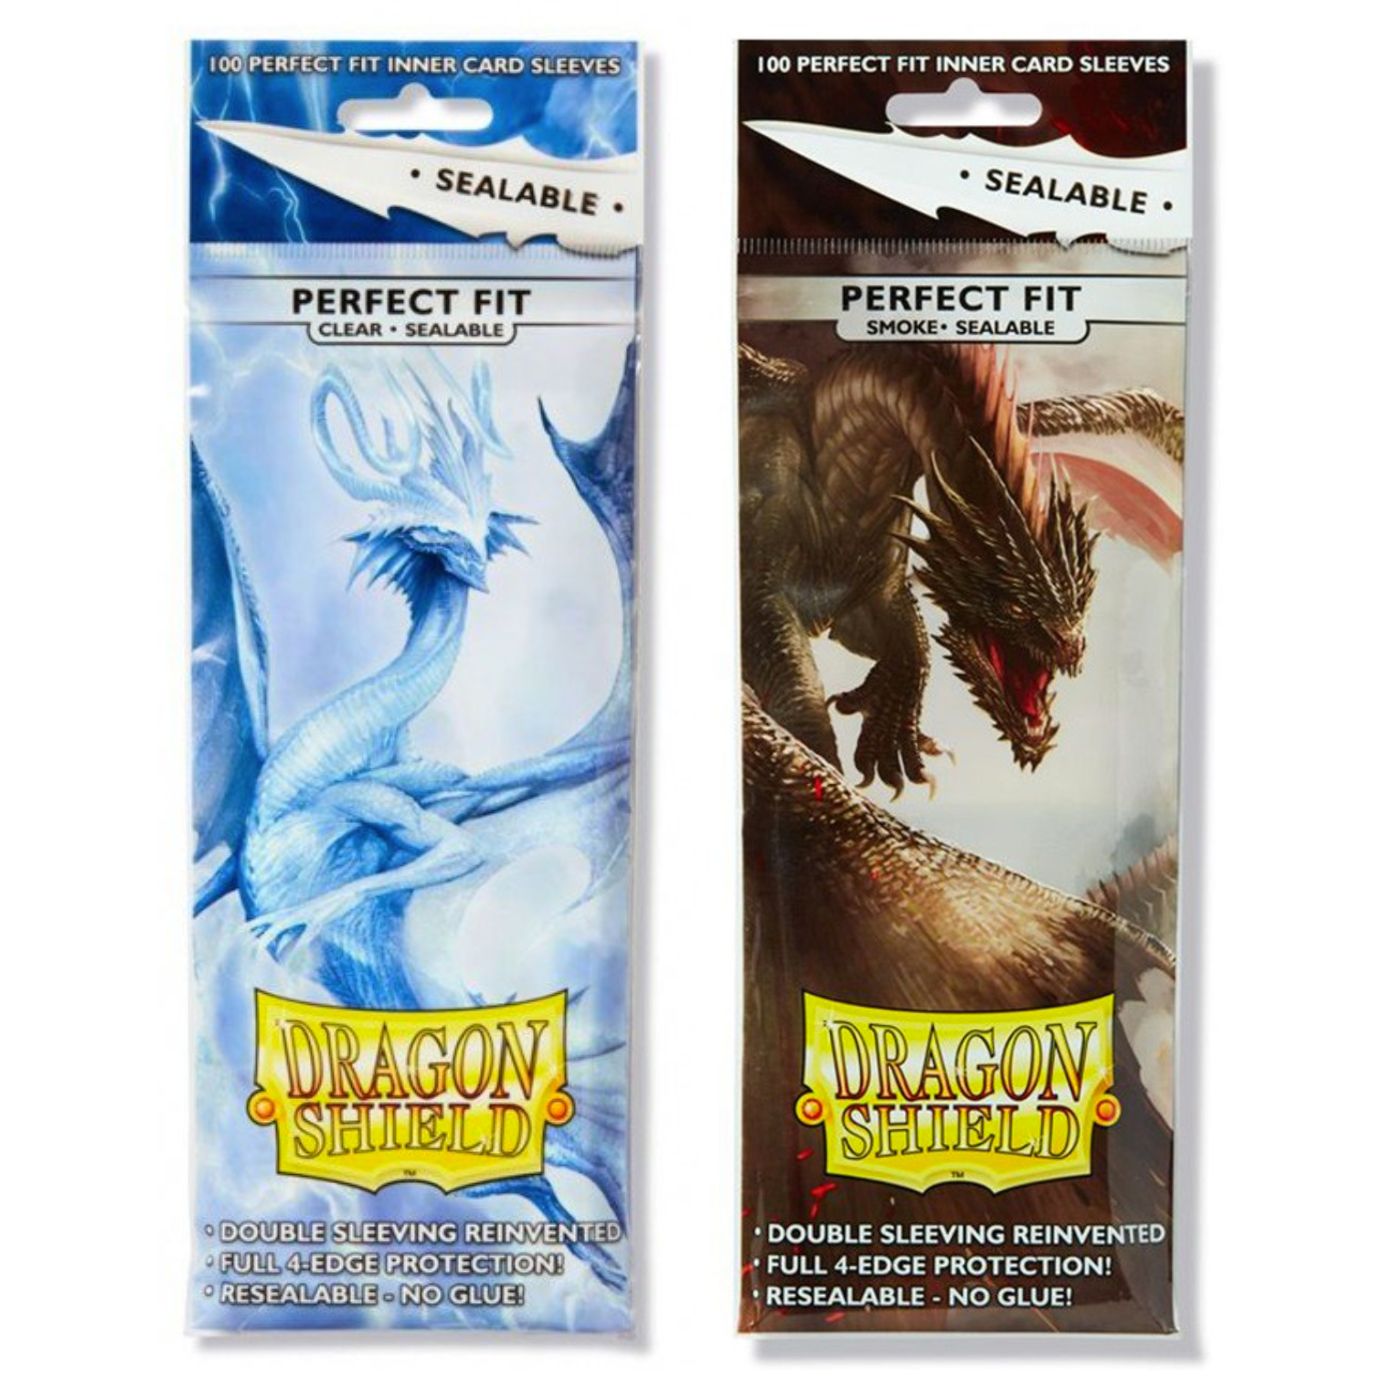 Dragon Shield Perfect Fit Inner Card Sleeves SMOKE Sealable 1 pack of 100